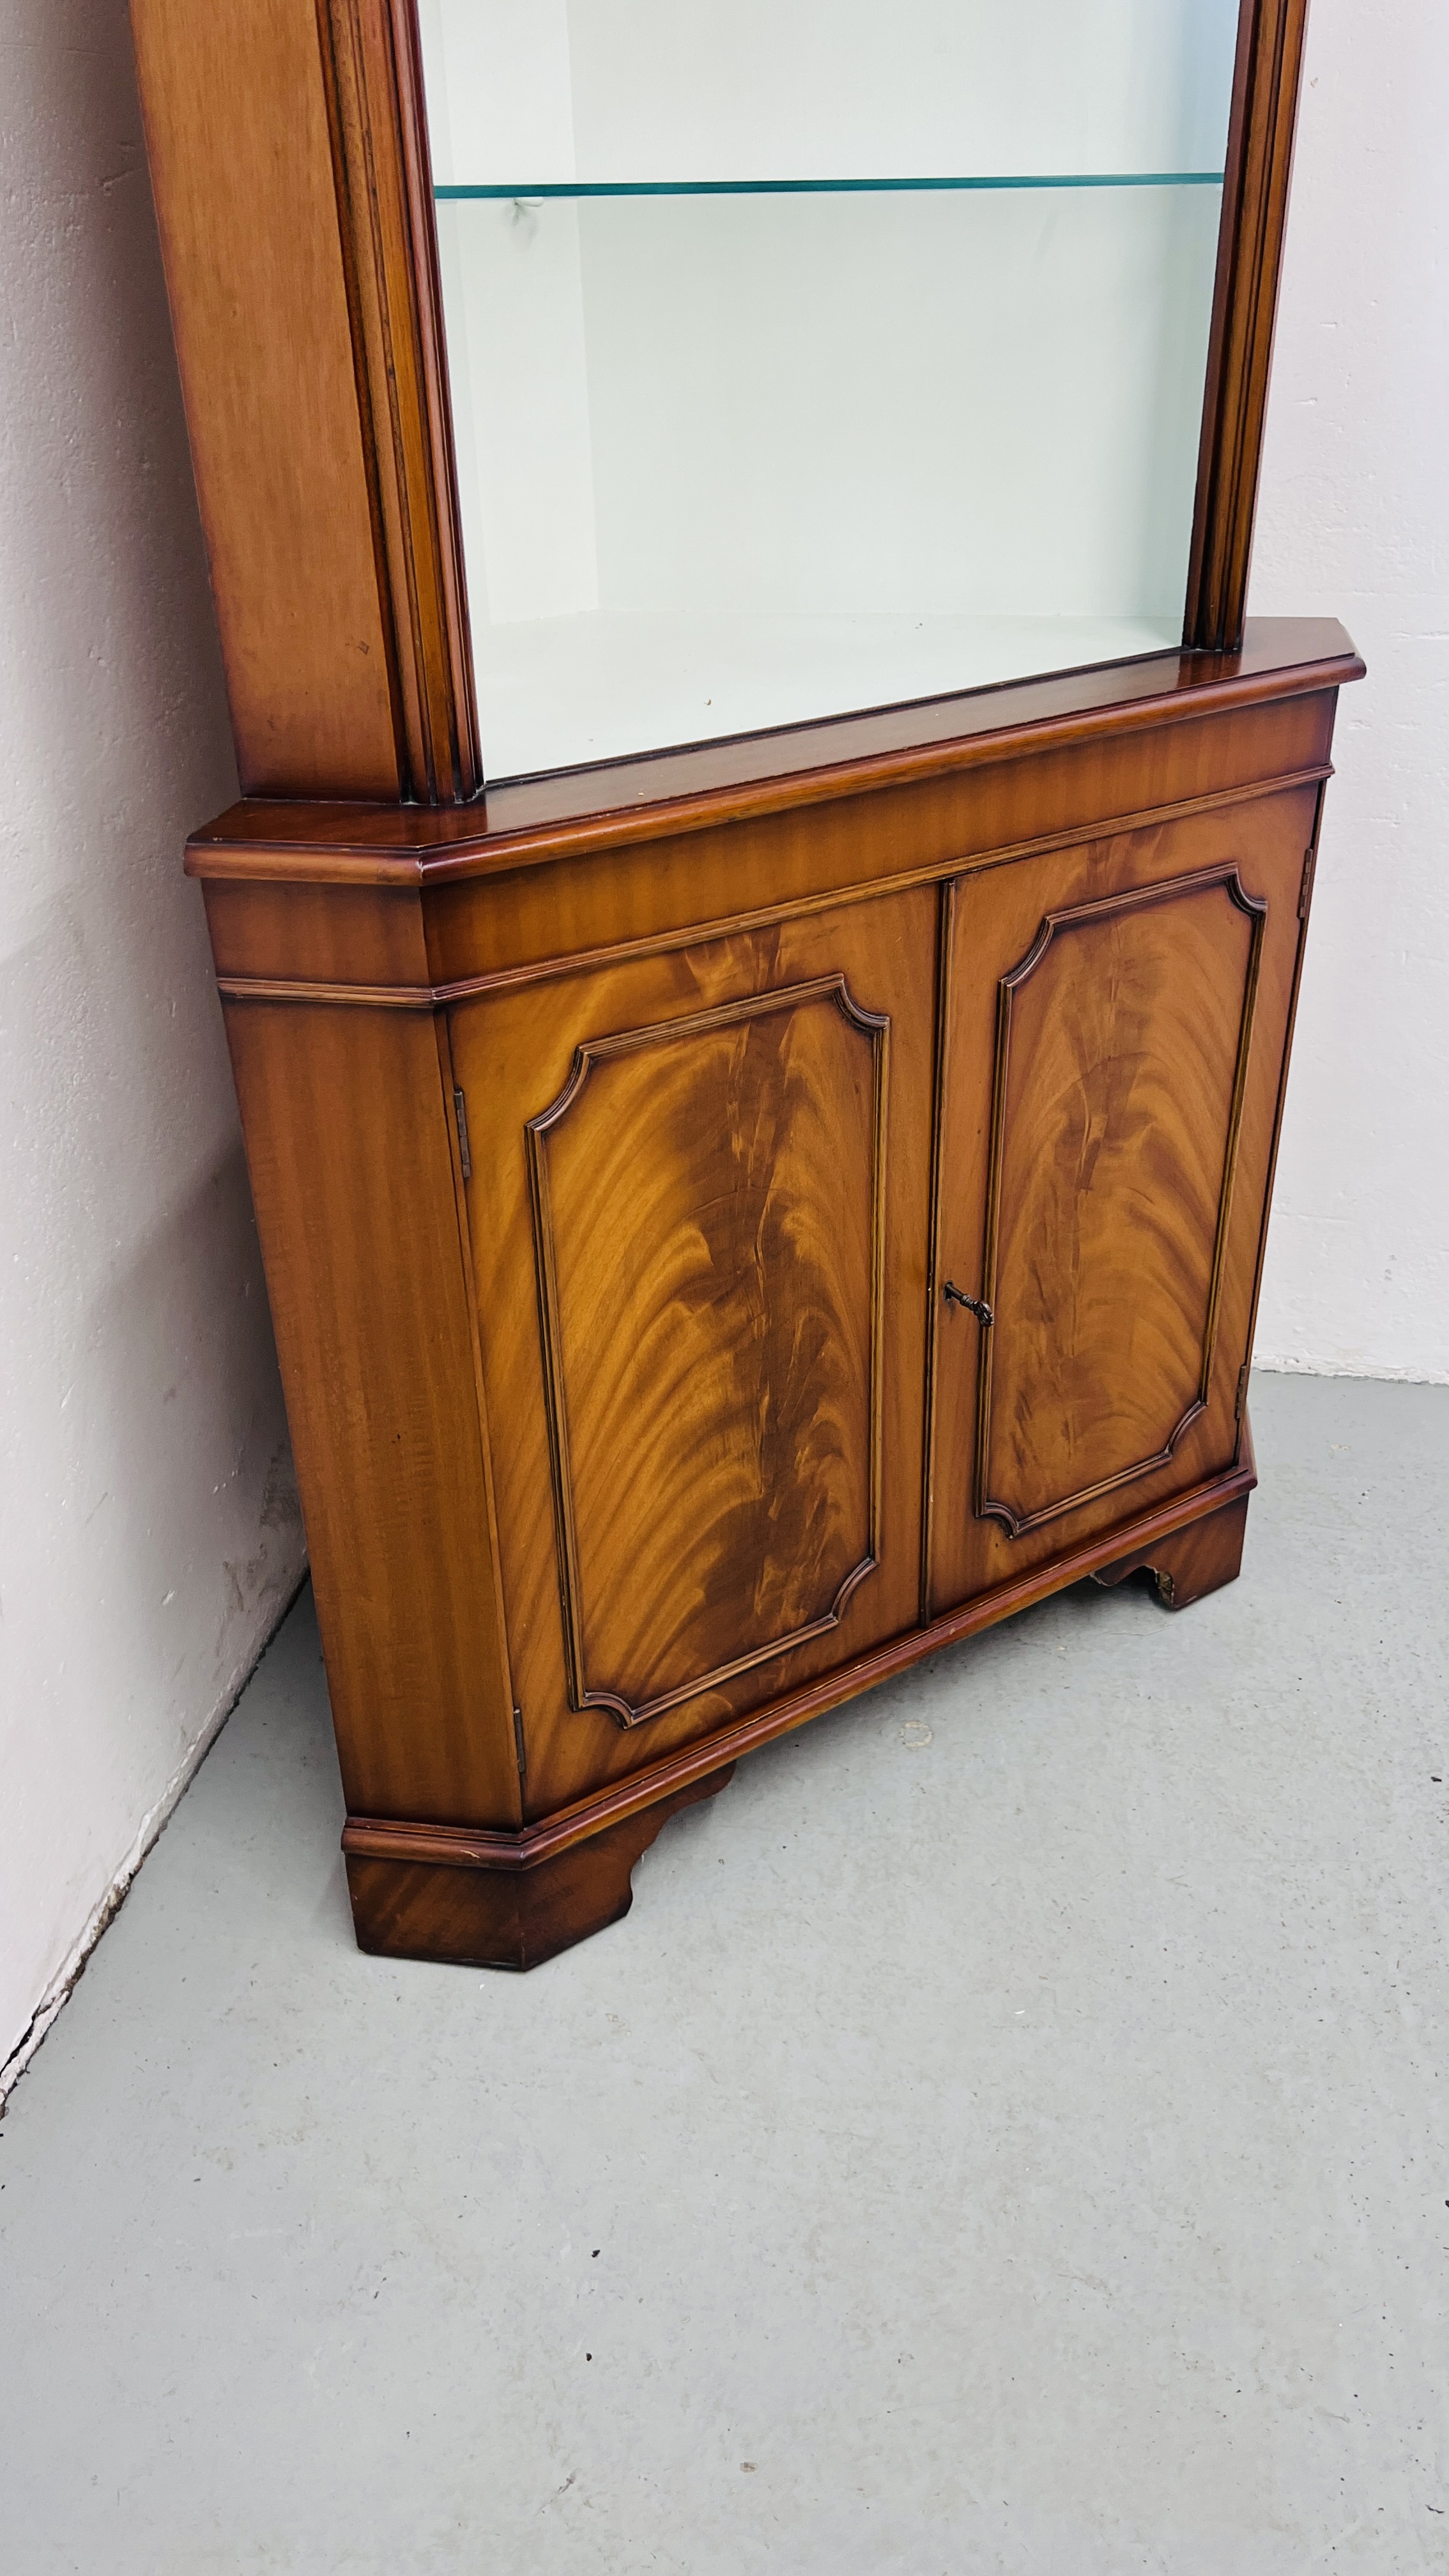 A QUALITY REPRODUCTION MAHOGANY FINISH CORNER CABINET WITH OPEN SHELVED TOP W 92CM, H 180CM. - Image 6 of 8